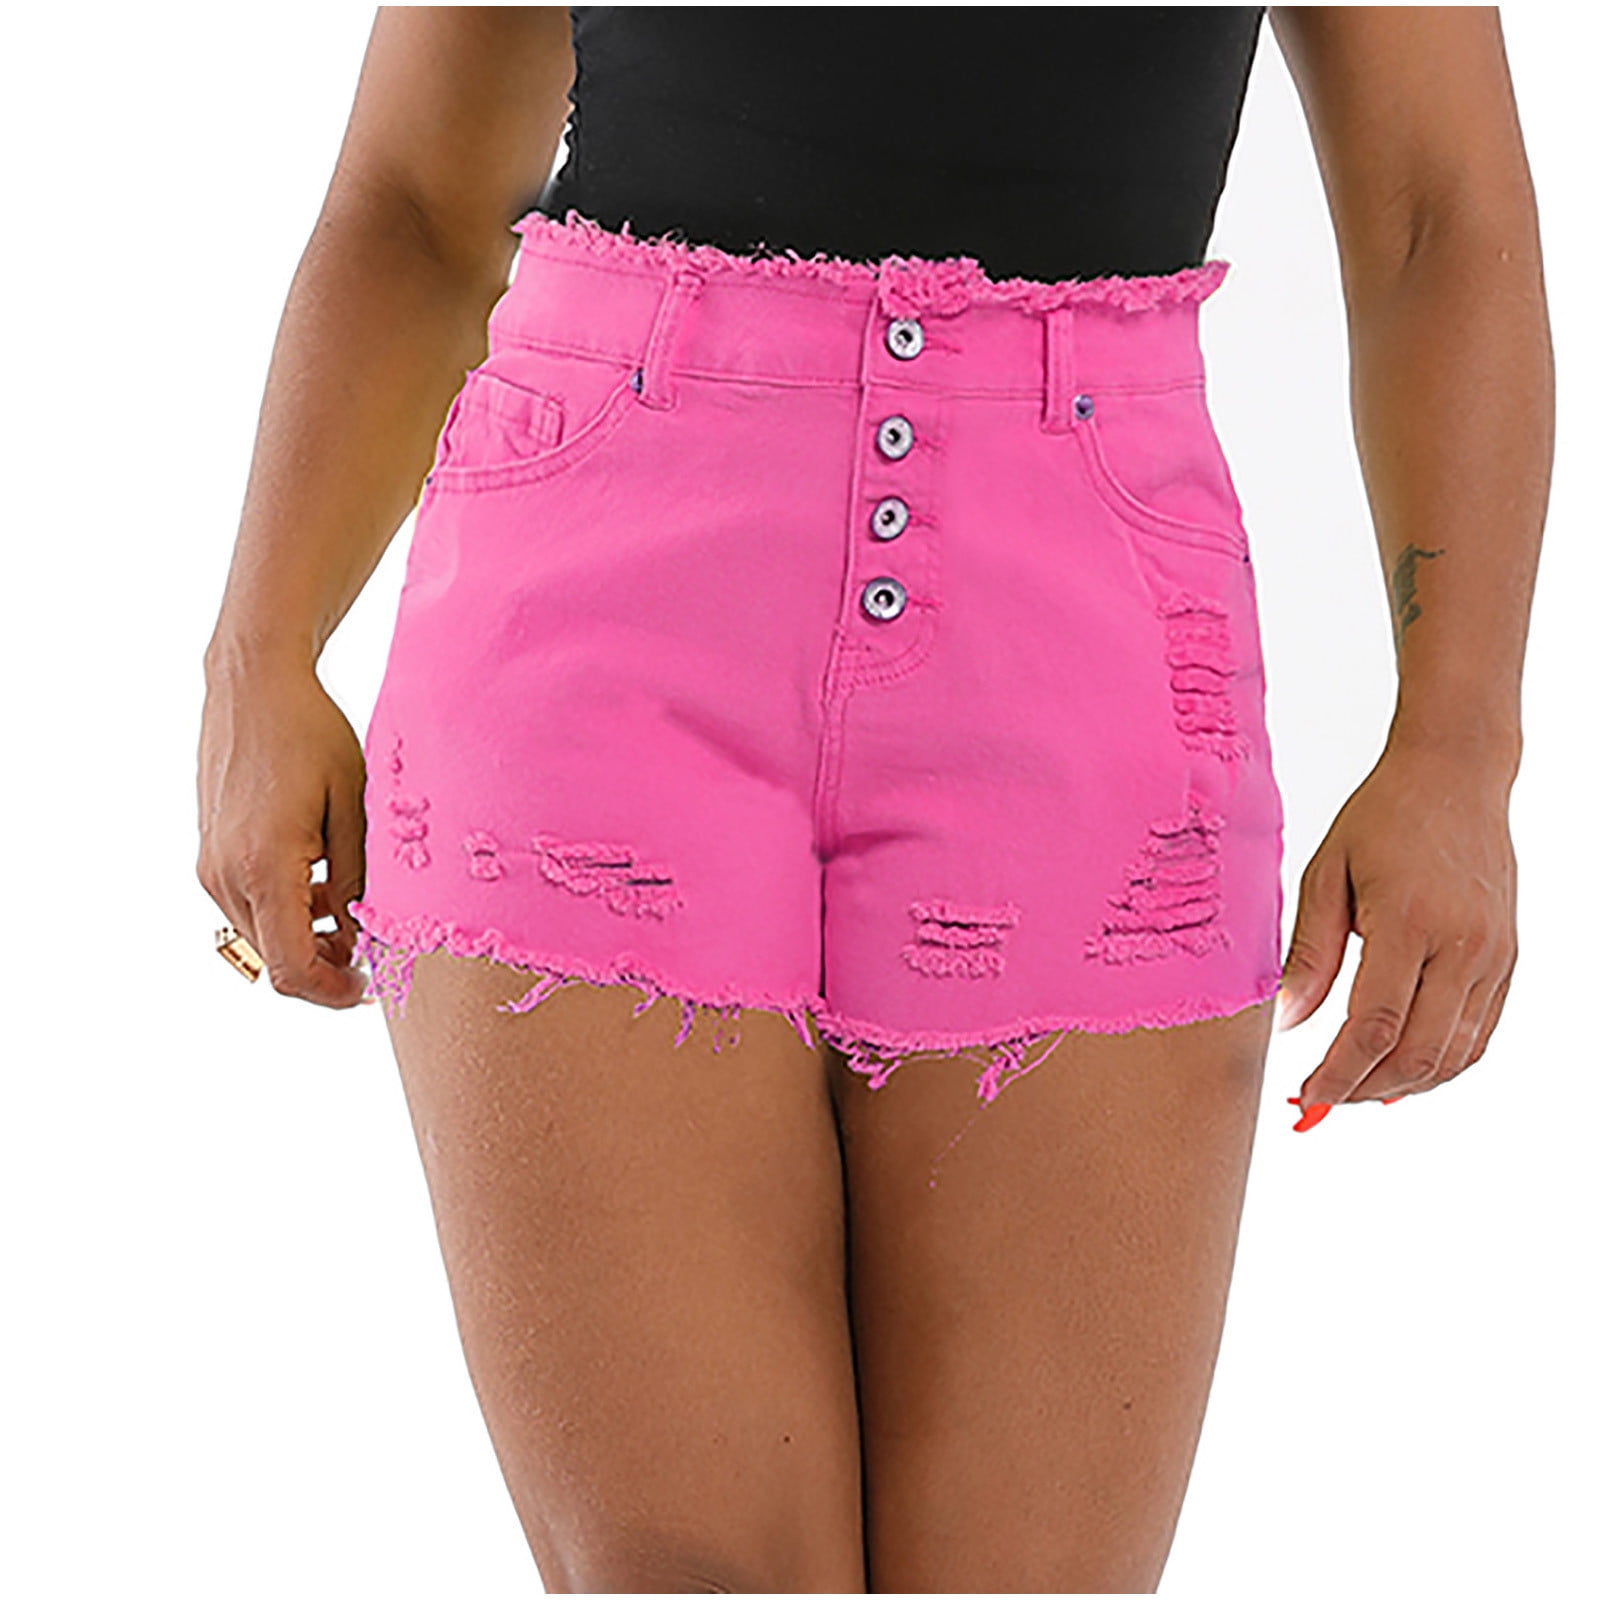 Rqyyd Ripped Jean Shorts for Women Mid Rise Frayed Hem Stretchy Tassels Denim Shorts Hot Pink S, Women's, Size: Small